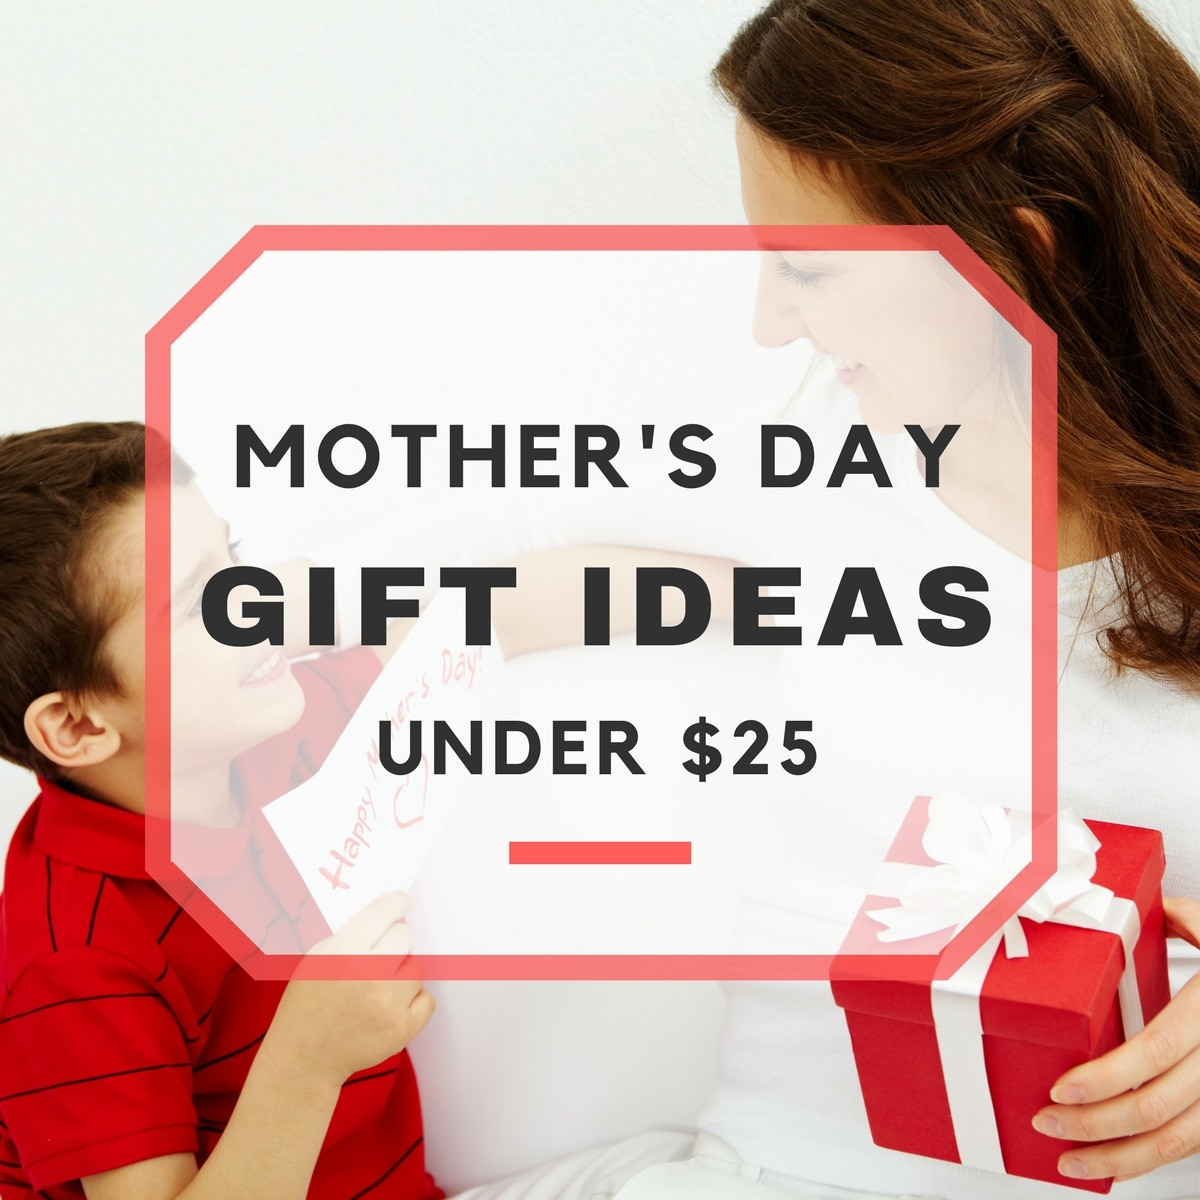 Mothers Day Cheap Gift Ideas
 10 Good Mother s Day Gift Ideas Under $25